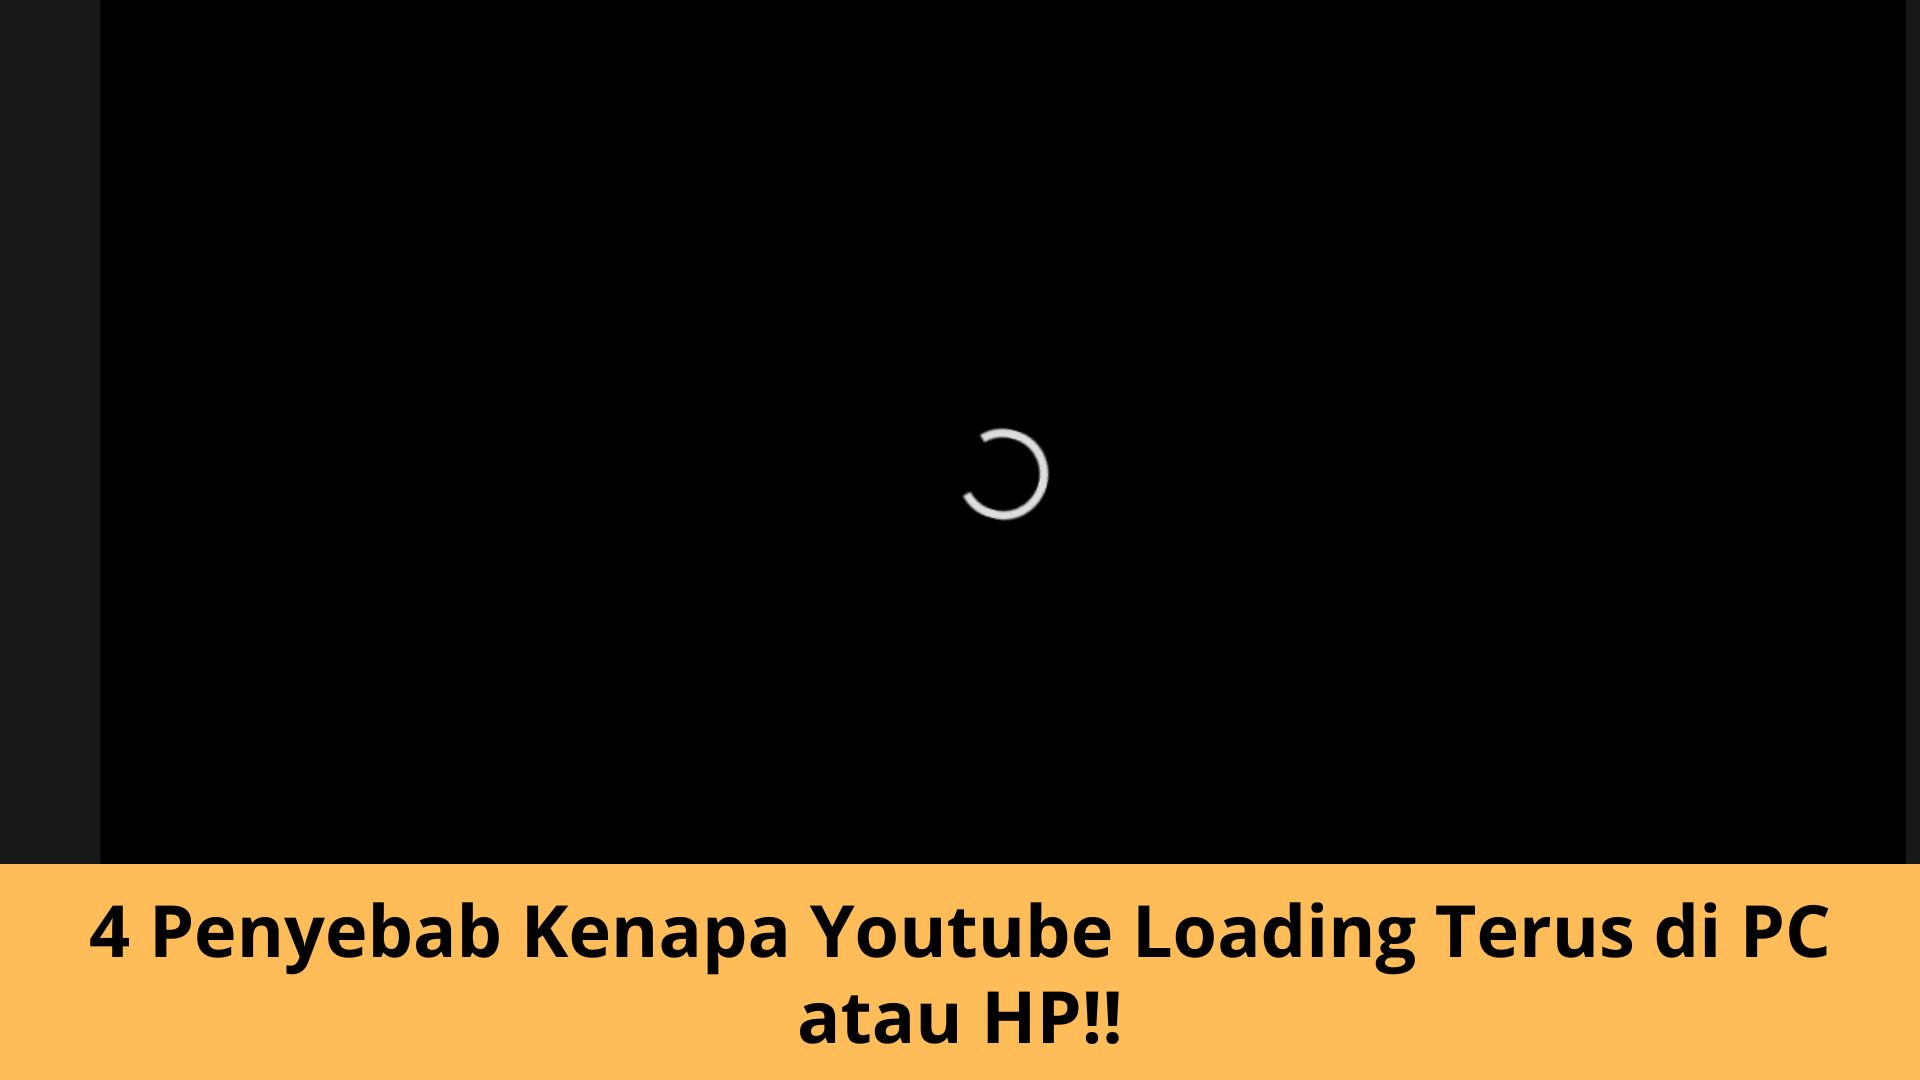 Loading youtube. ASMR boy moans. Total Solar Eclipse for small WA Town Partially visible in nz.